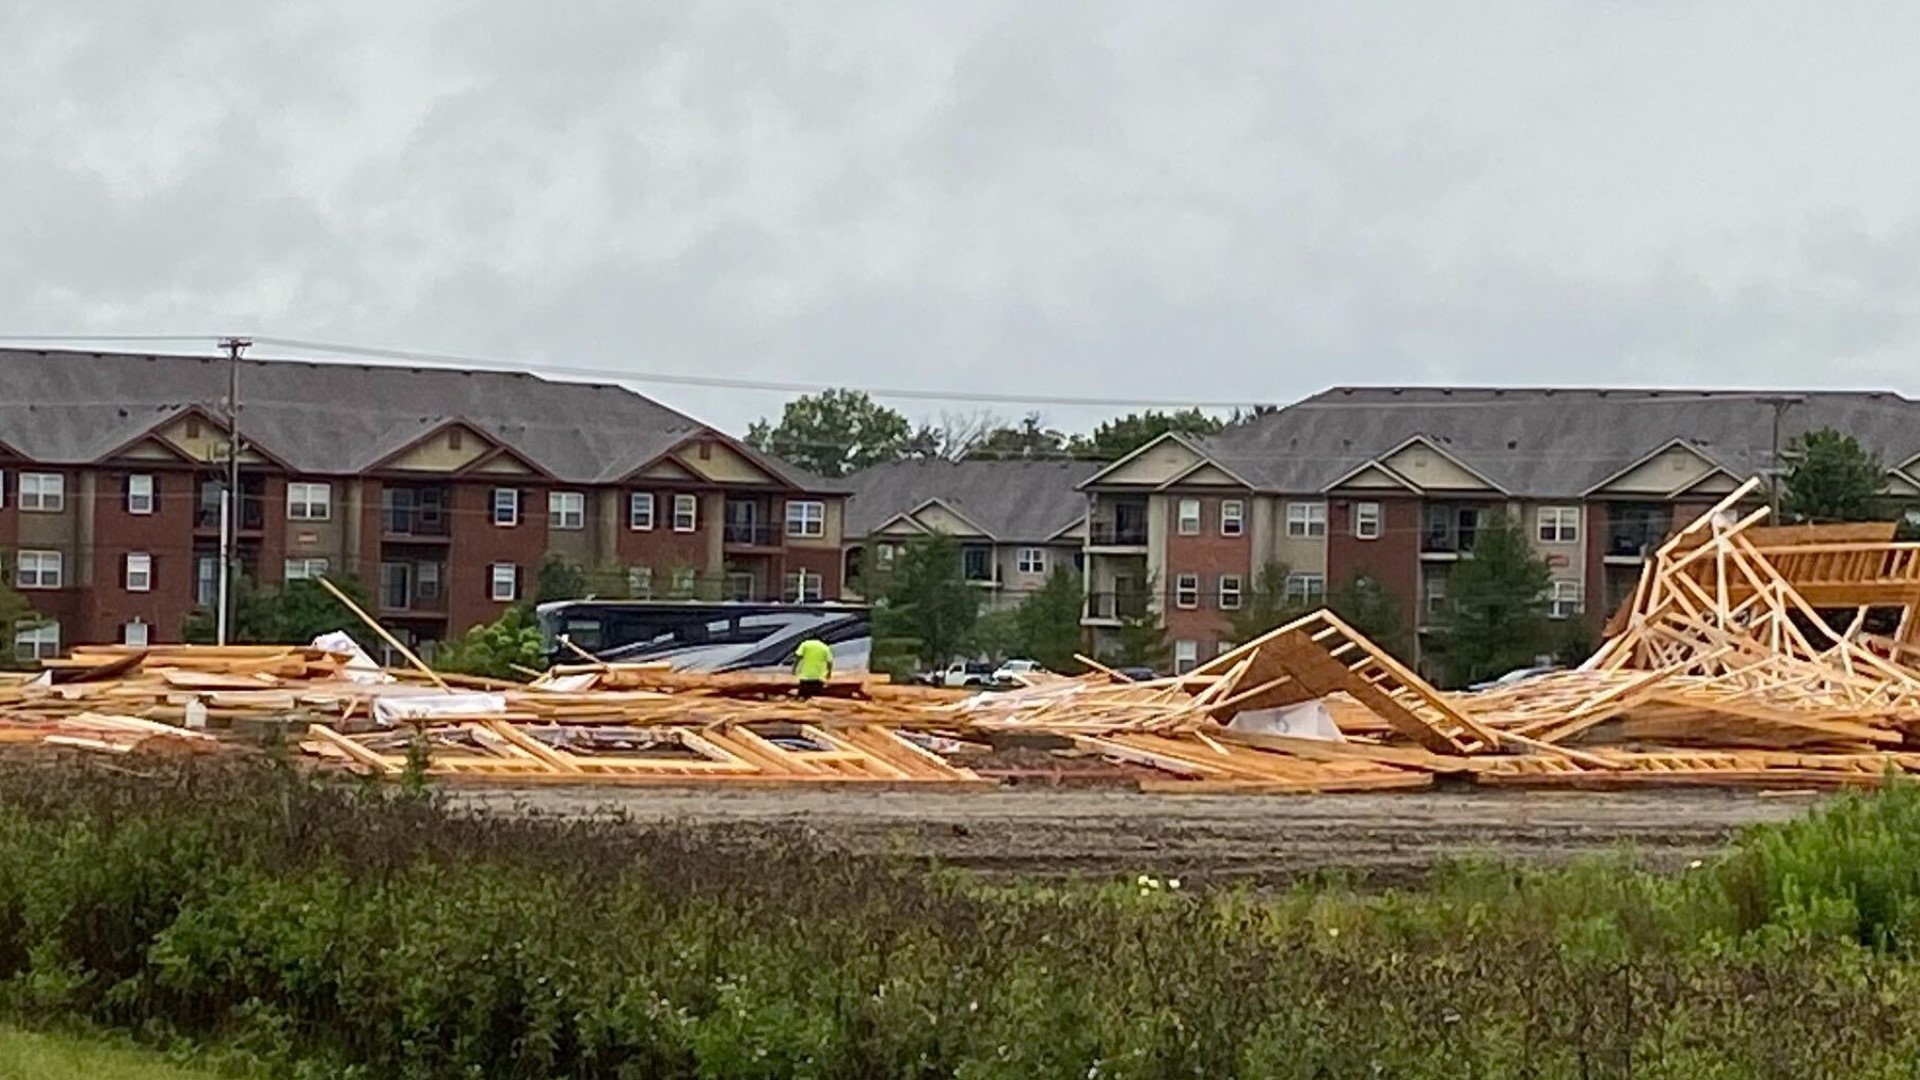 A 14-year-old has died after building collapsed at a construction site in Brownsburg.